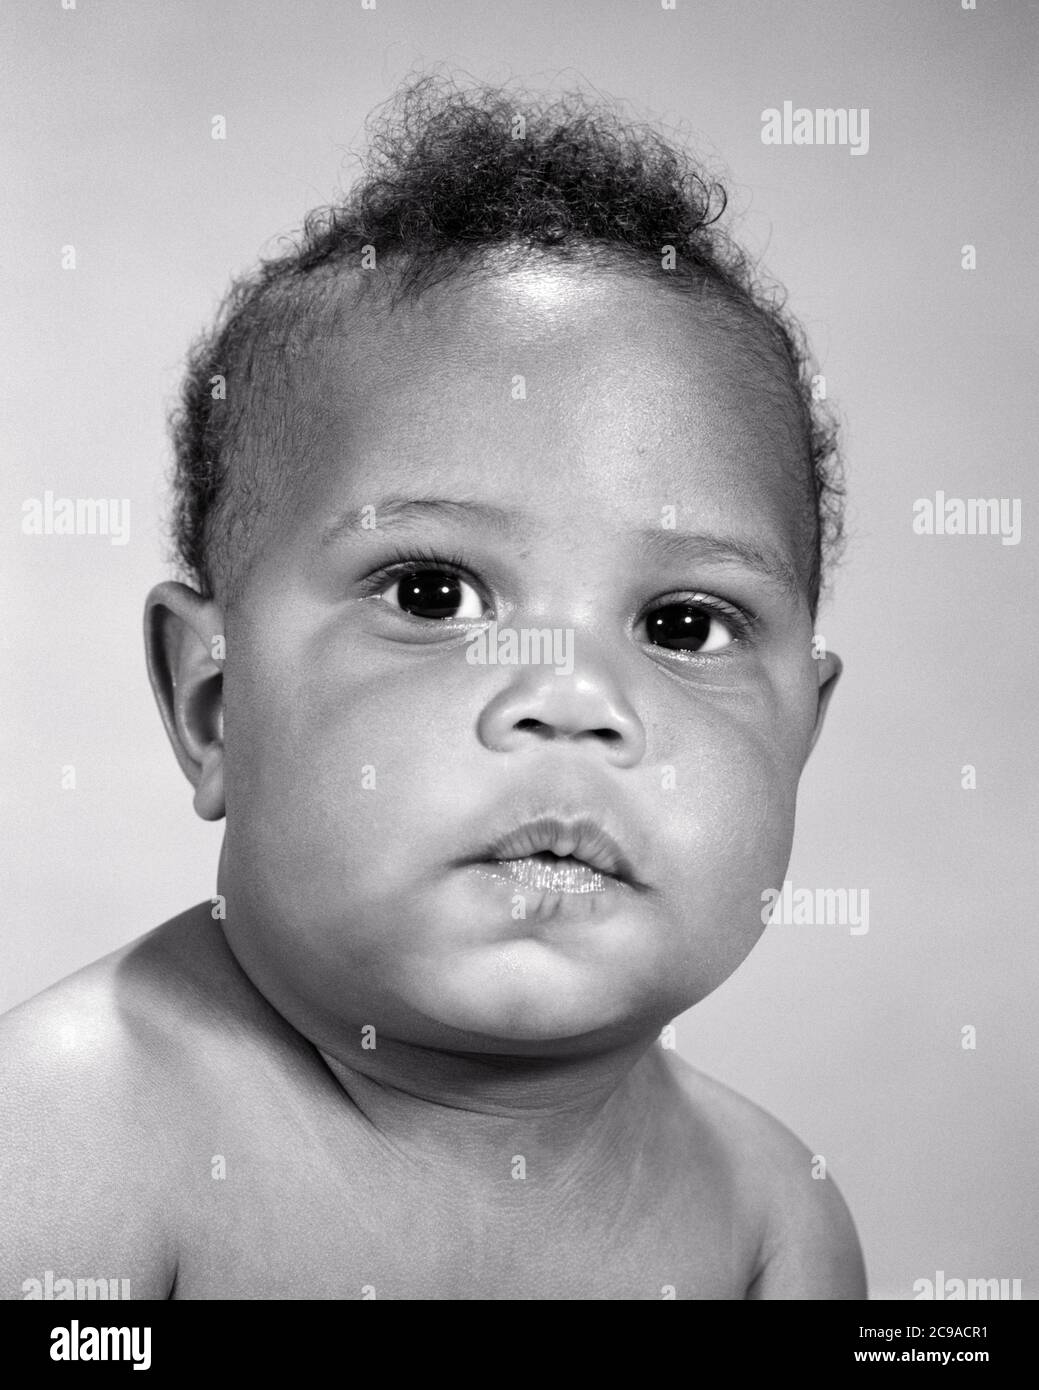 1960s PORTRAIT OF SERIOUS AFRICAN AMERICAN BABY BOY WITH POUTING QUESTIONING FACIAL EXPRESSION LOOKING AT CAMERA - n2168 HAR001 HARS EXPRESSIONS B&W SADNESS EYE CONTACT HEAD AND SHOULDERS POUTING AFRICAN-AMERICANS AFRICAN-AMERICAN CHEEKS BLACK ETHNICITY CONCEPTUAL SINCERE BABY BOY SOLEMN FOCUSED GROWTH INTENSE JUVENILES QUESTIONING BLACK AND WHITE CAREFUL EARNEST HAR001 INTENT OLD FASHIONED AFRICAN AMERICANS Stock Photo